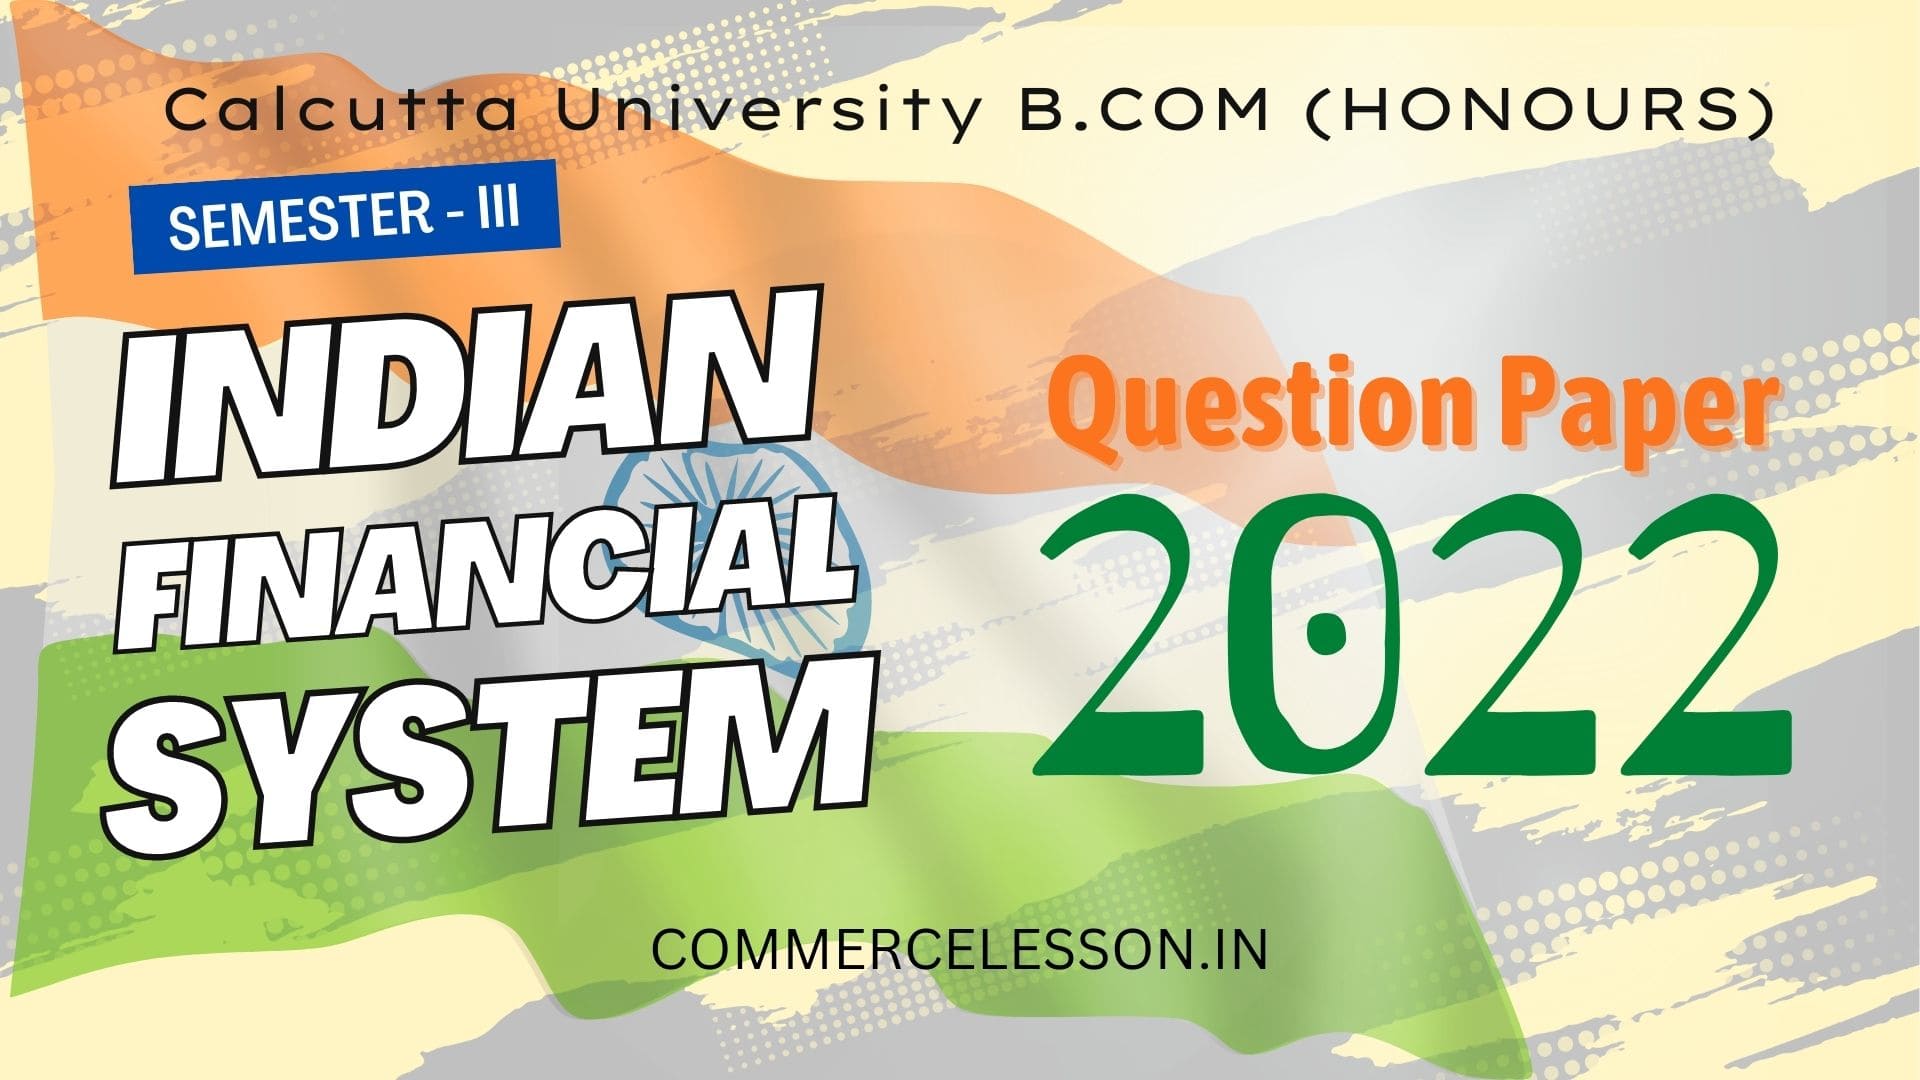 Indian Financial System Honours Question Paper 2022